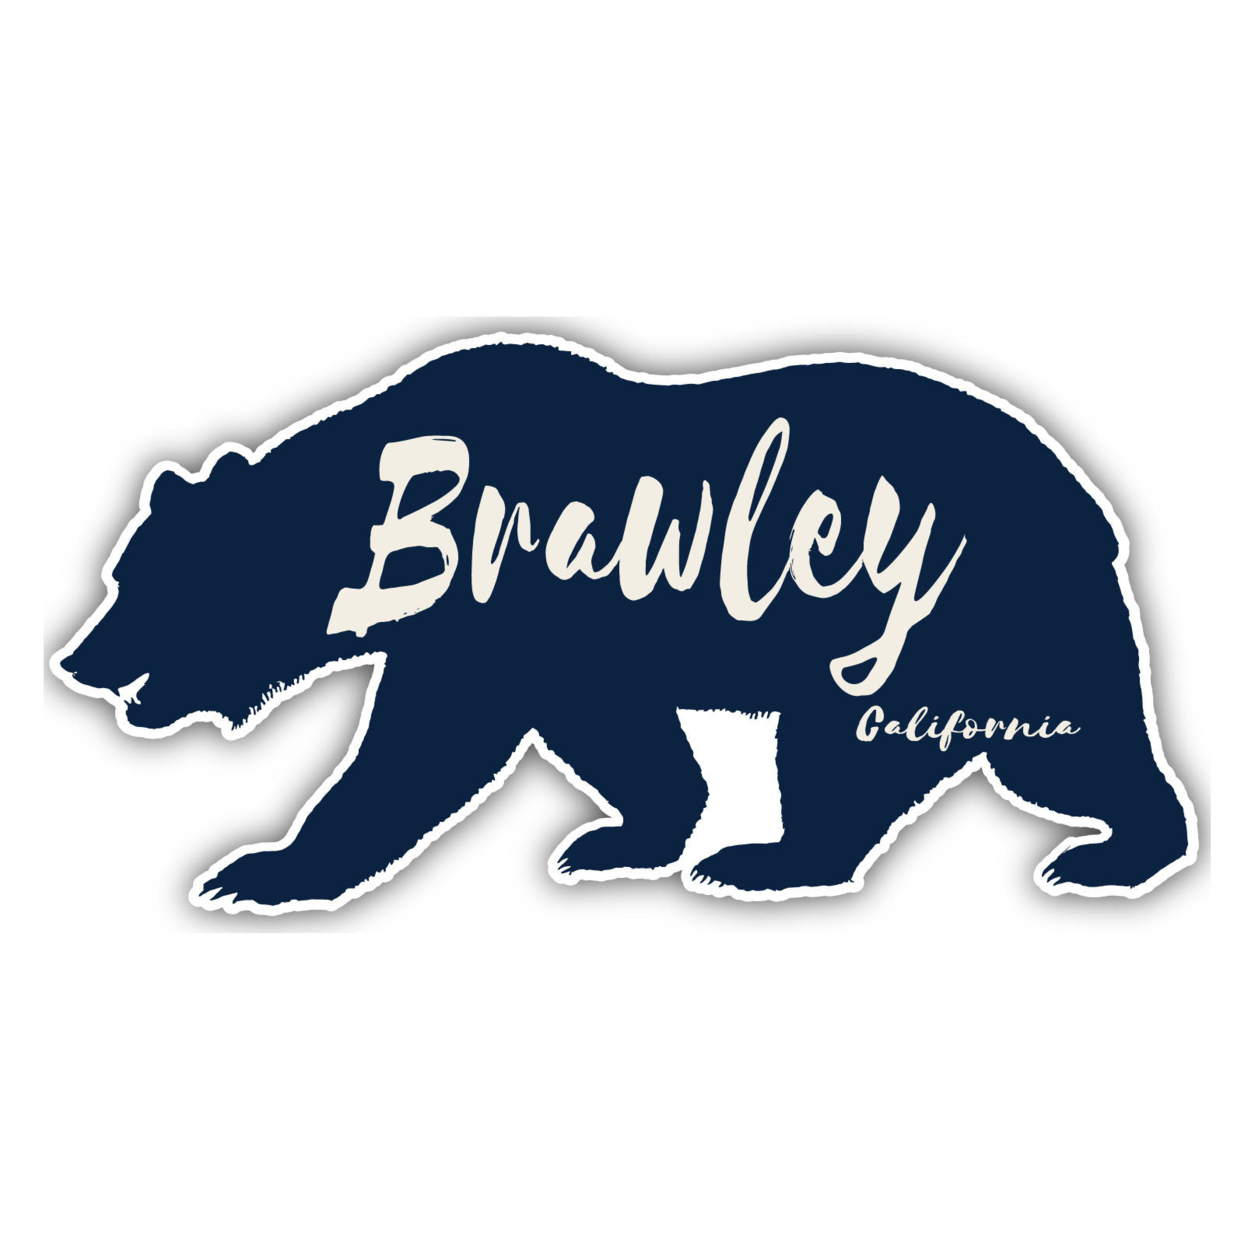 Brawley California Souvenir Decorative Stickers (Choose Theme And Size) - 4-Pack, 2-Inch, Bear